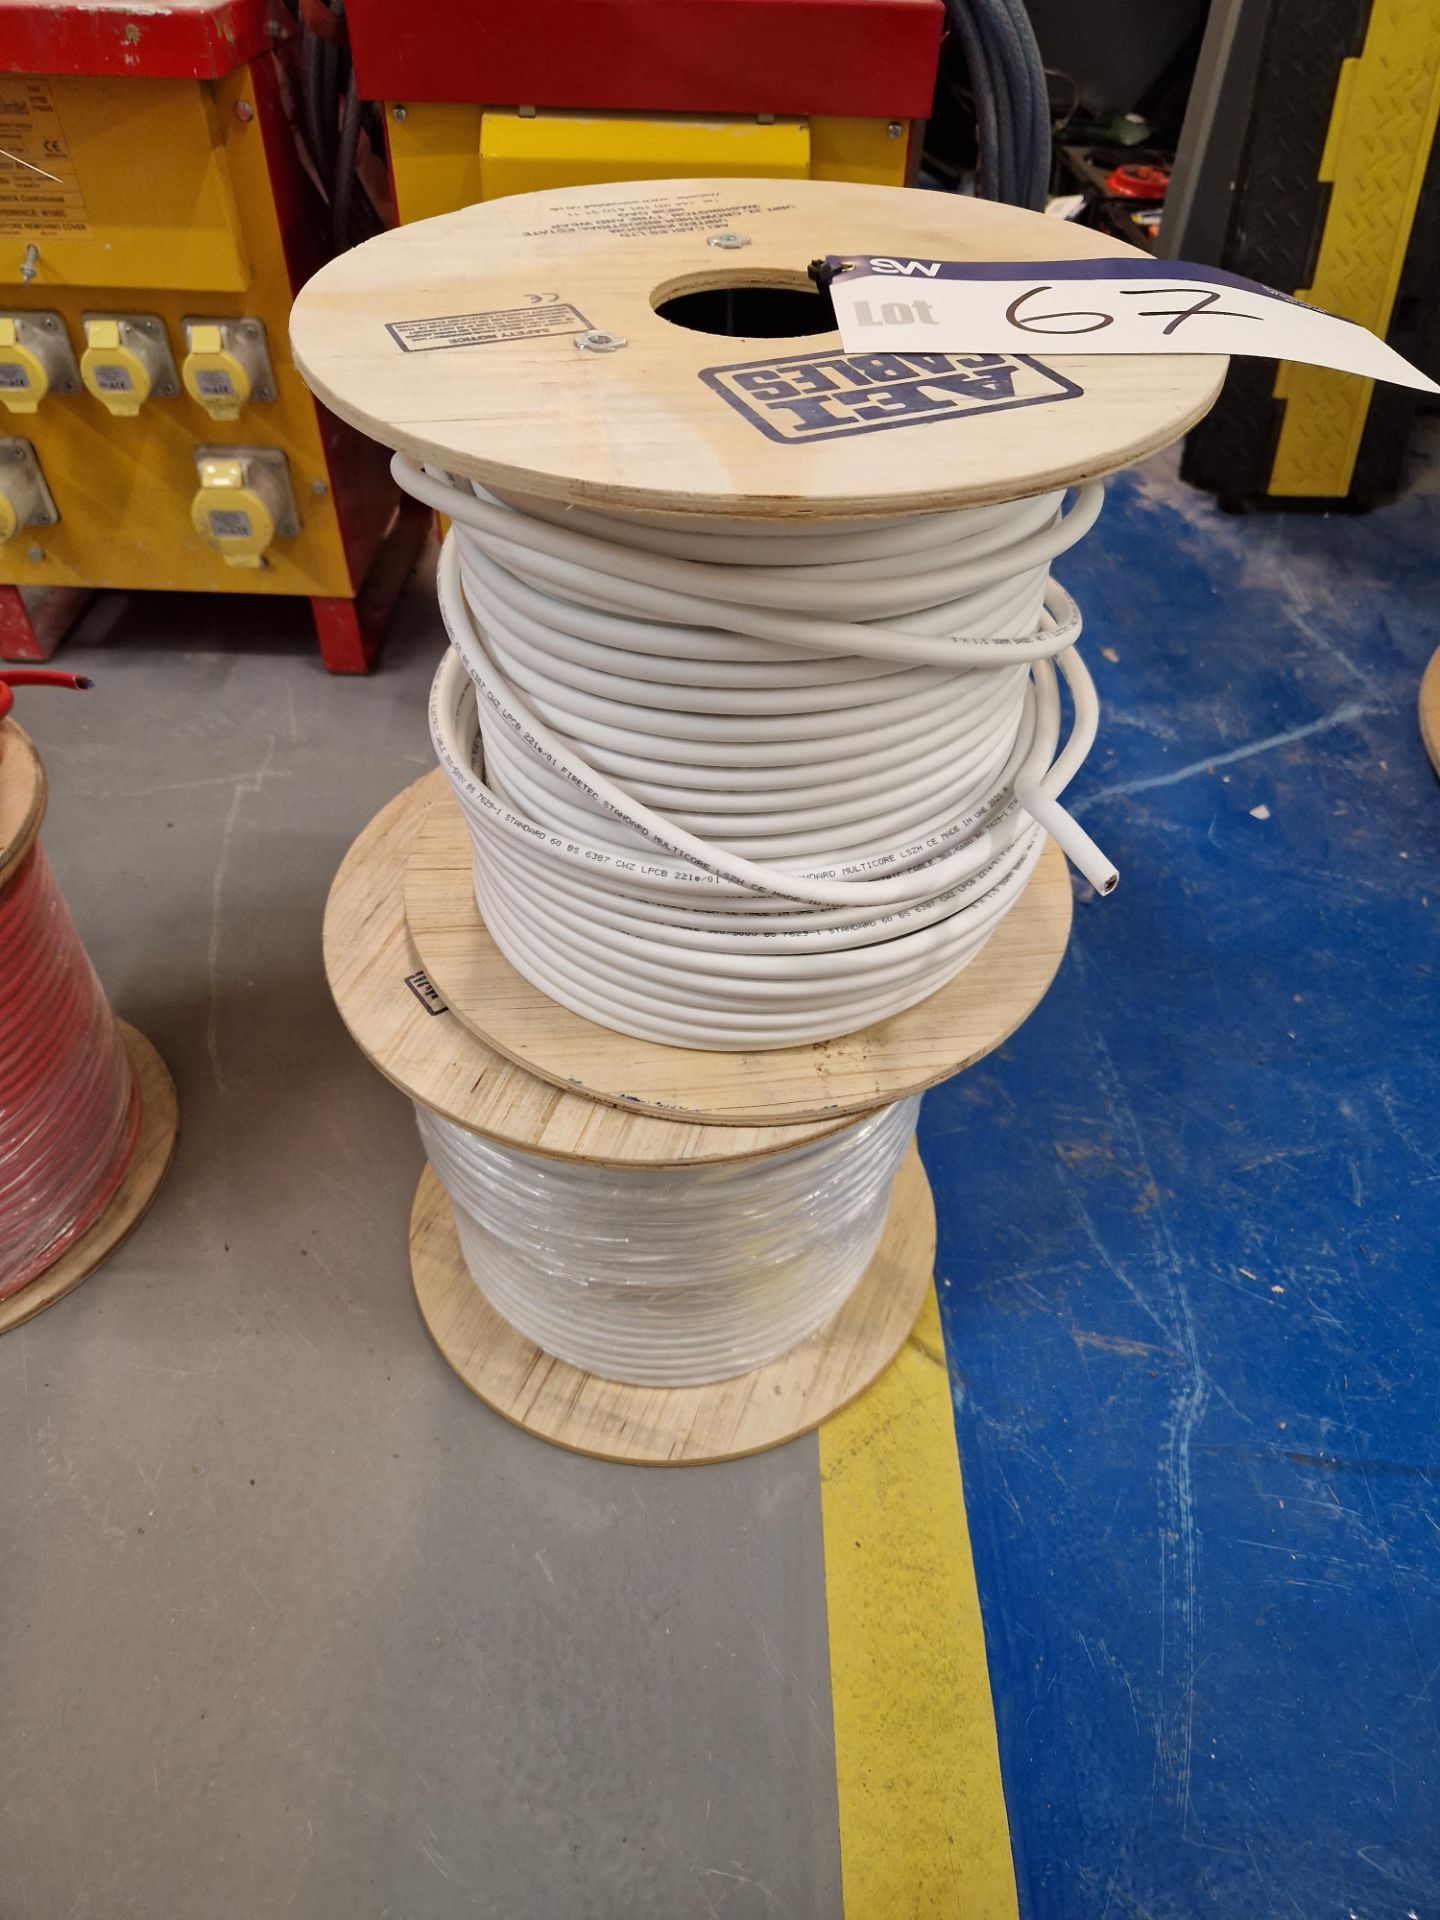 Two Rolls of AEI Cables BASEC 3 X 1.5 sq mm Electrical Cable Please read the following important